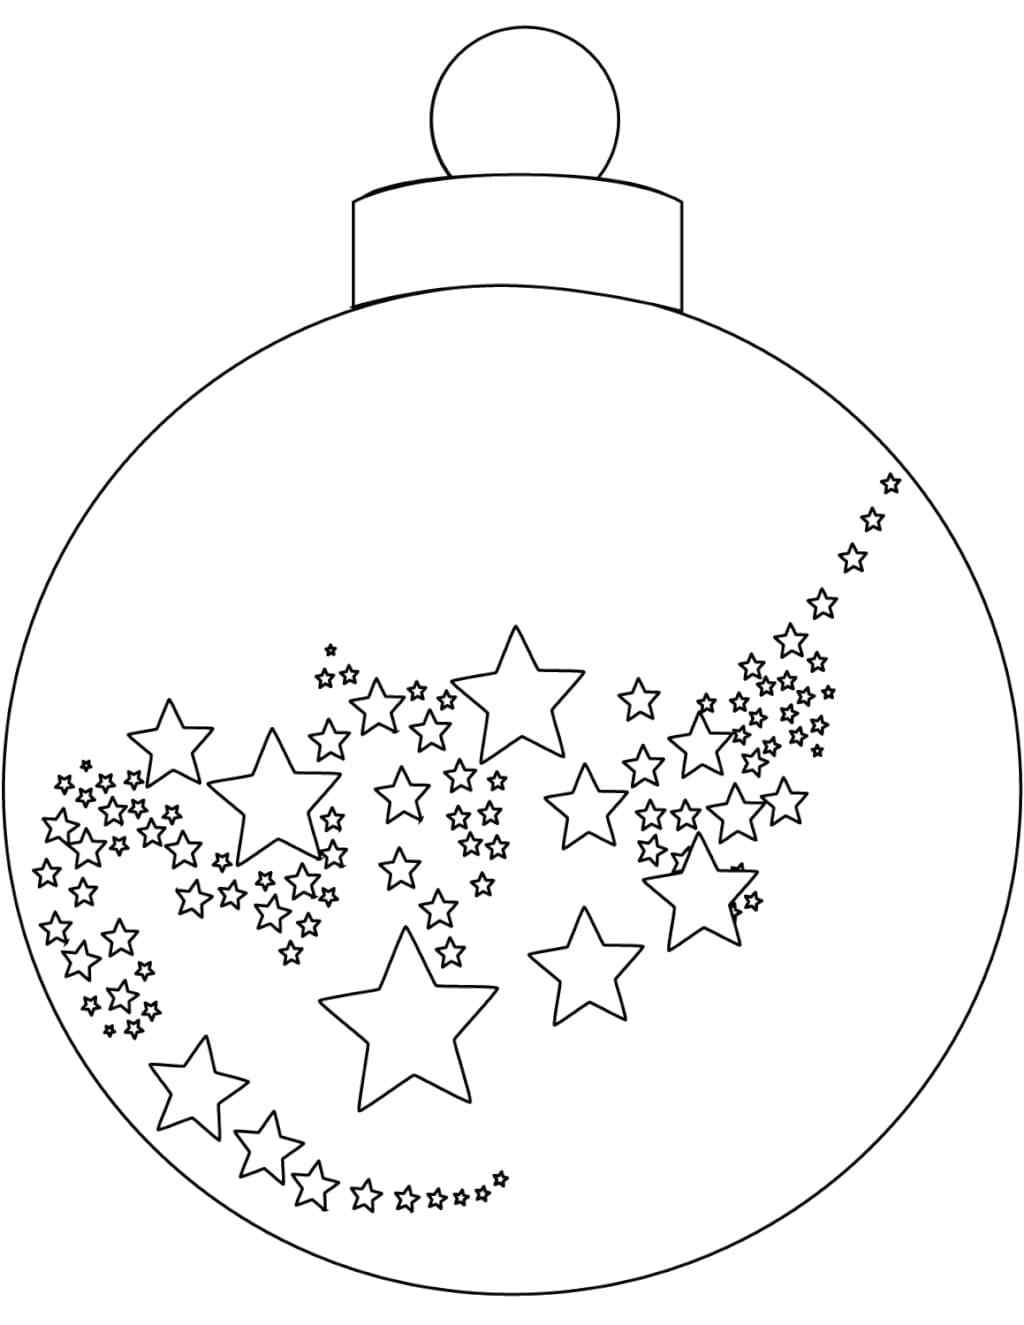 A Scattering Of Stars Is Depicted On Christmas Ornaments